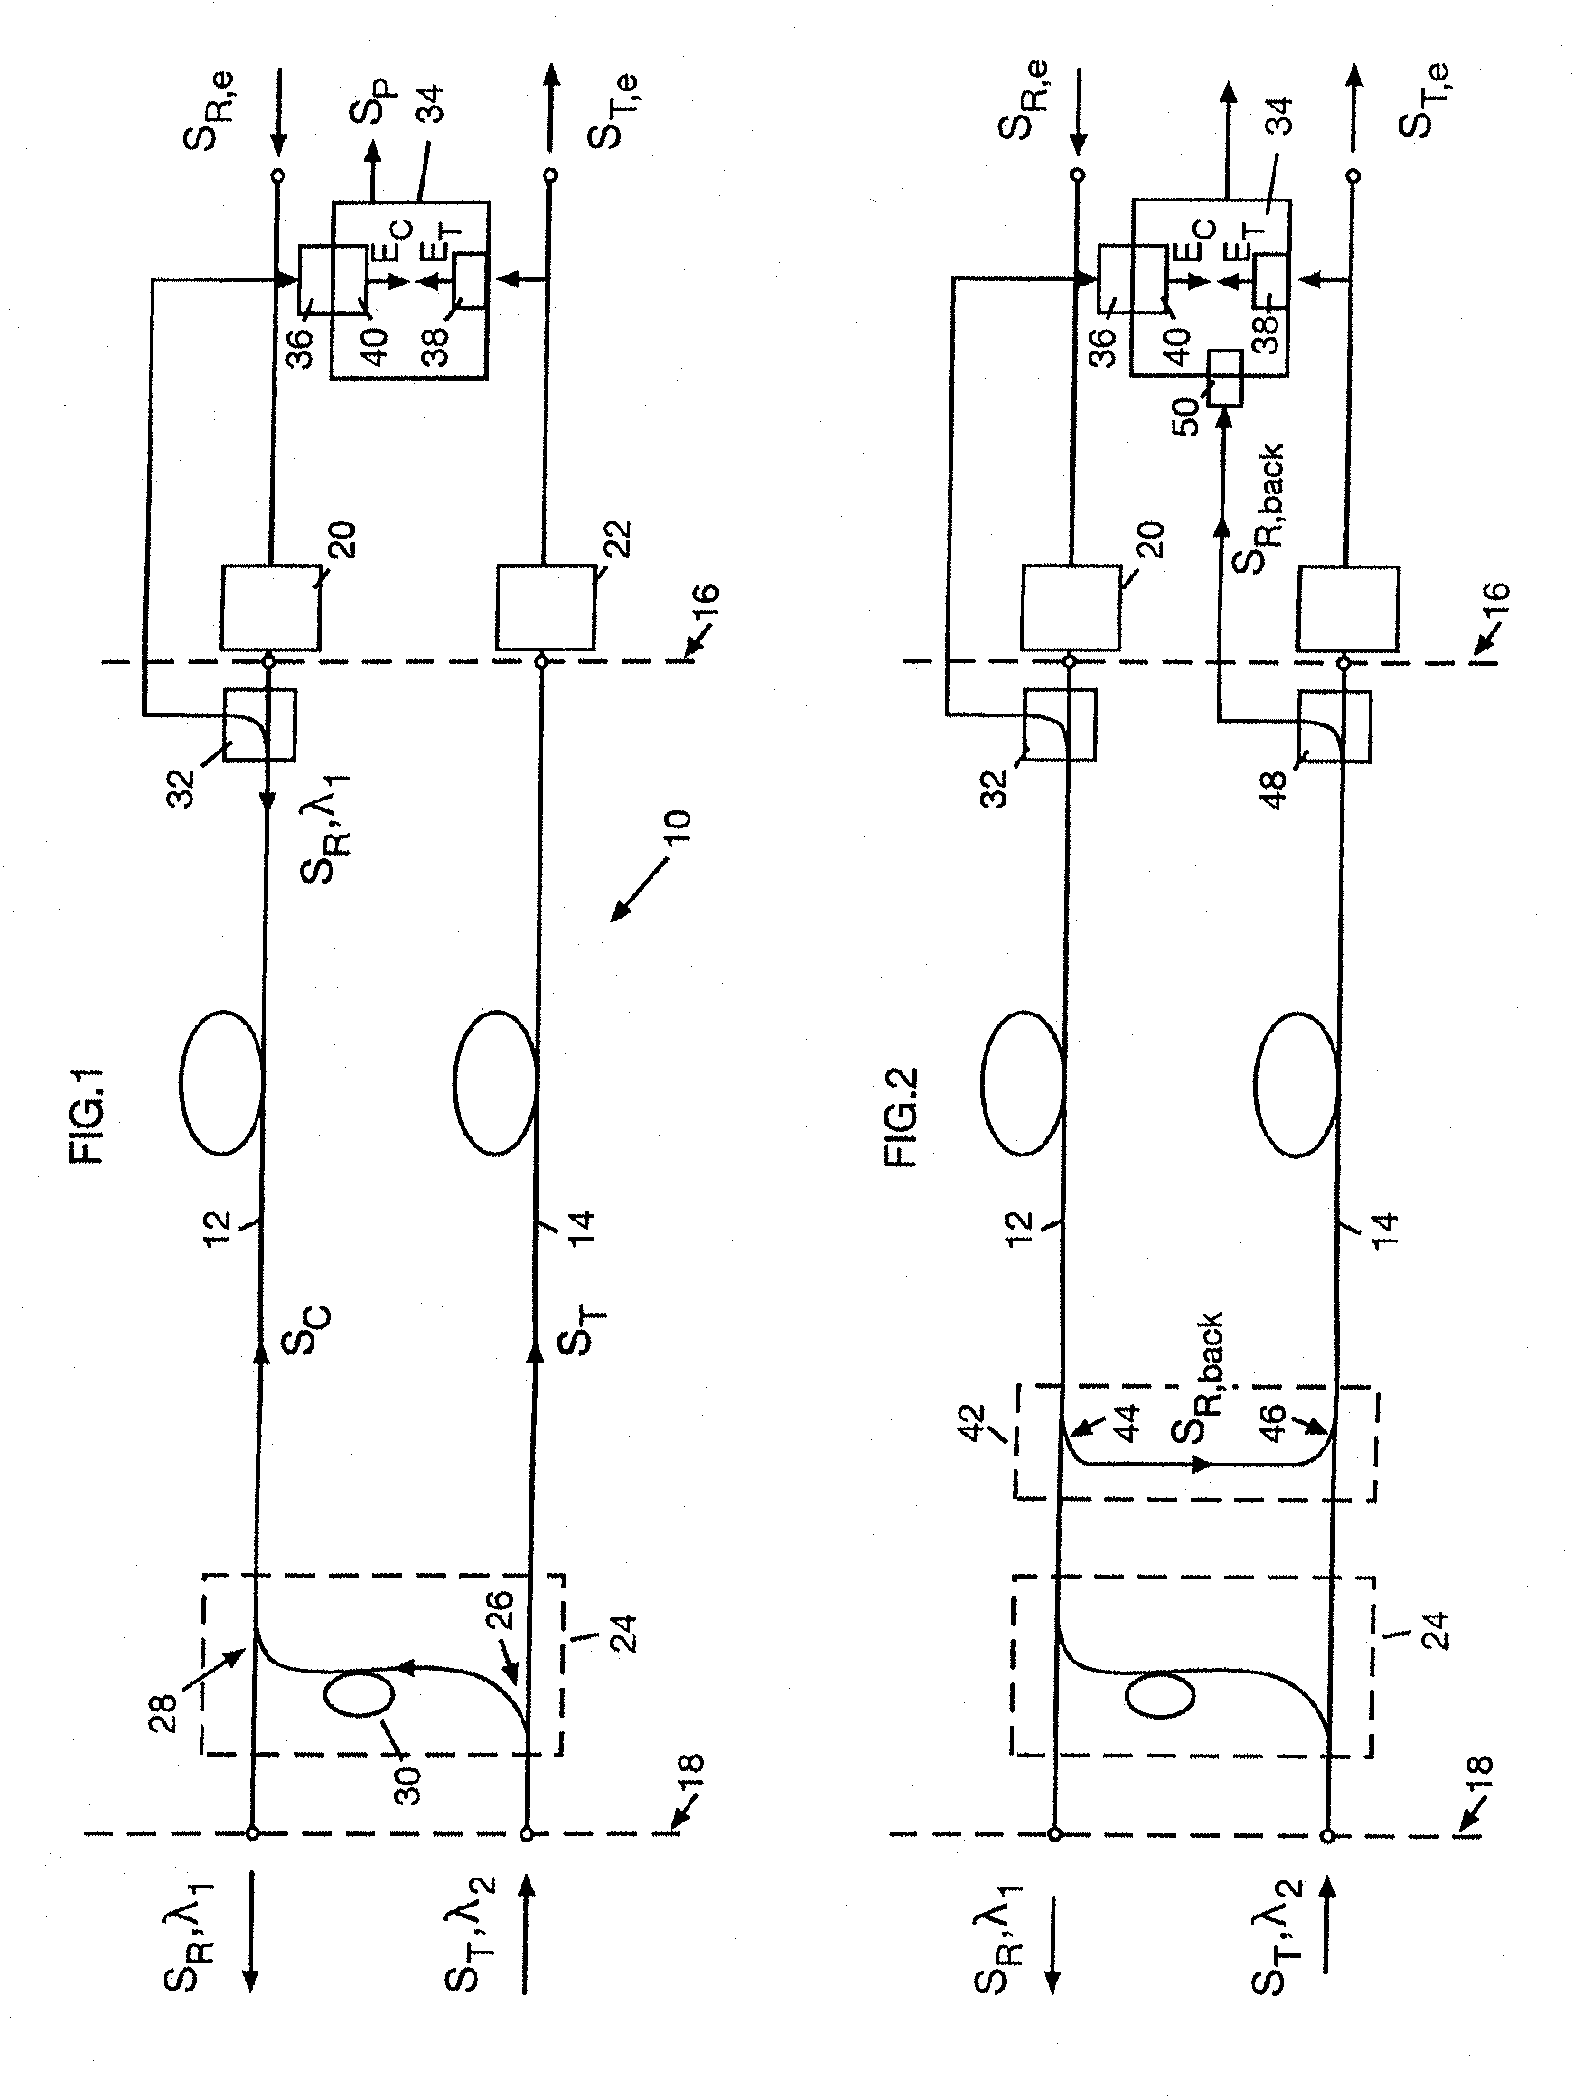 Method and system of monitoring a data transmission link, particularly an optical, bidirectional data transmission link